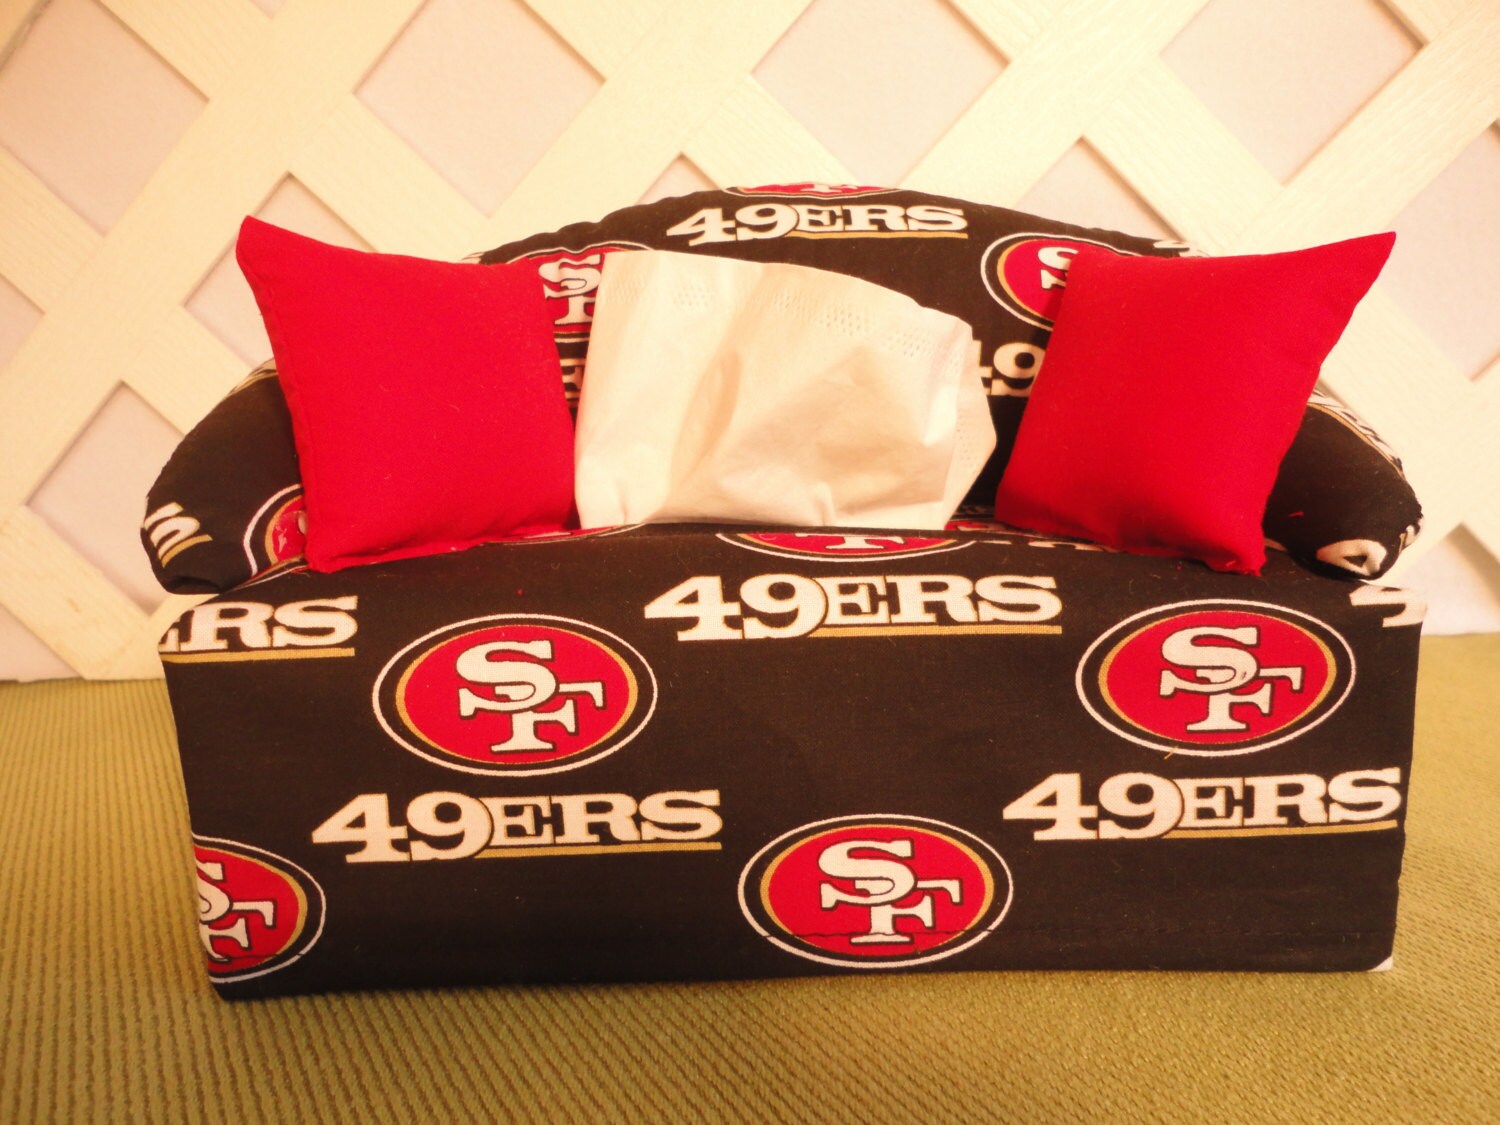 San Francisco 49ers Tissue Box Cover in Sofa Shape Red and